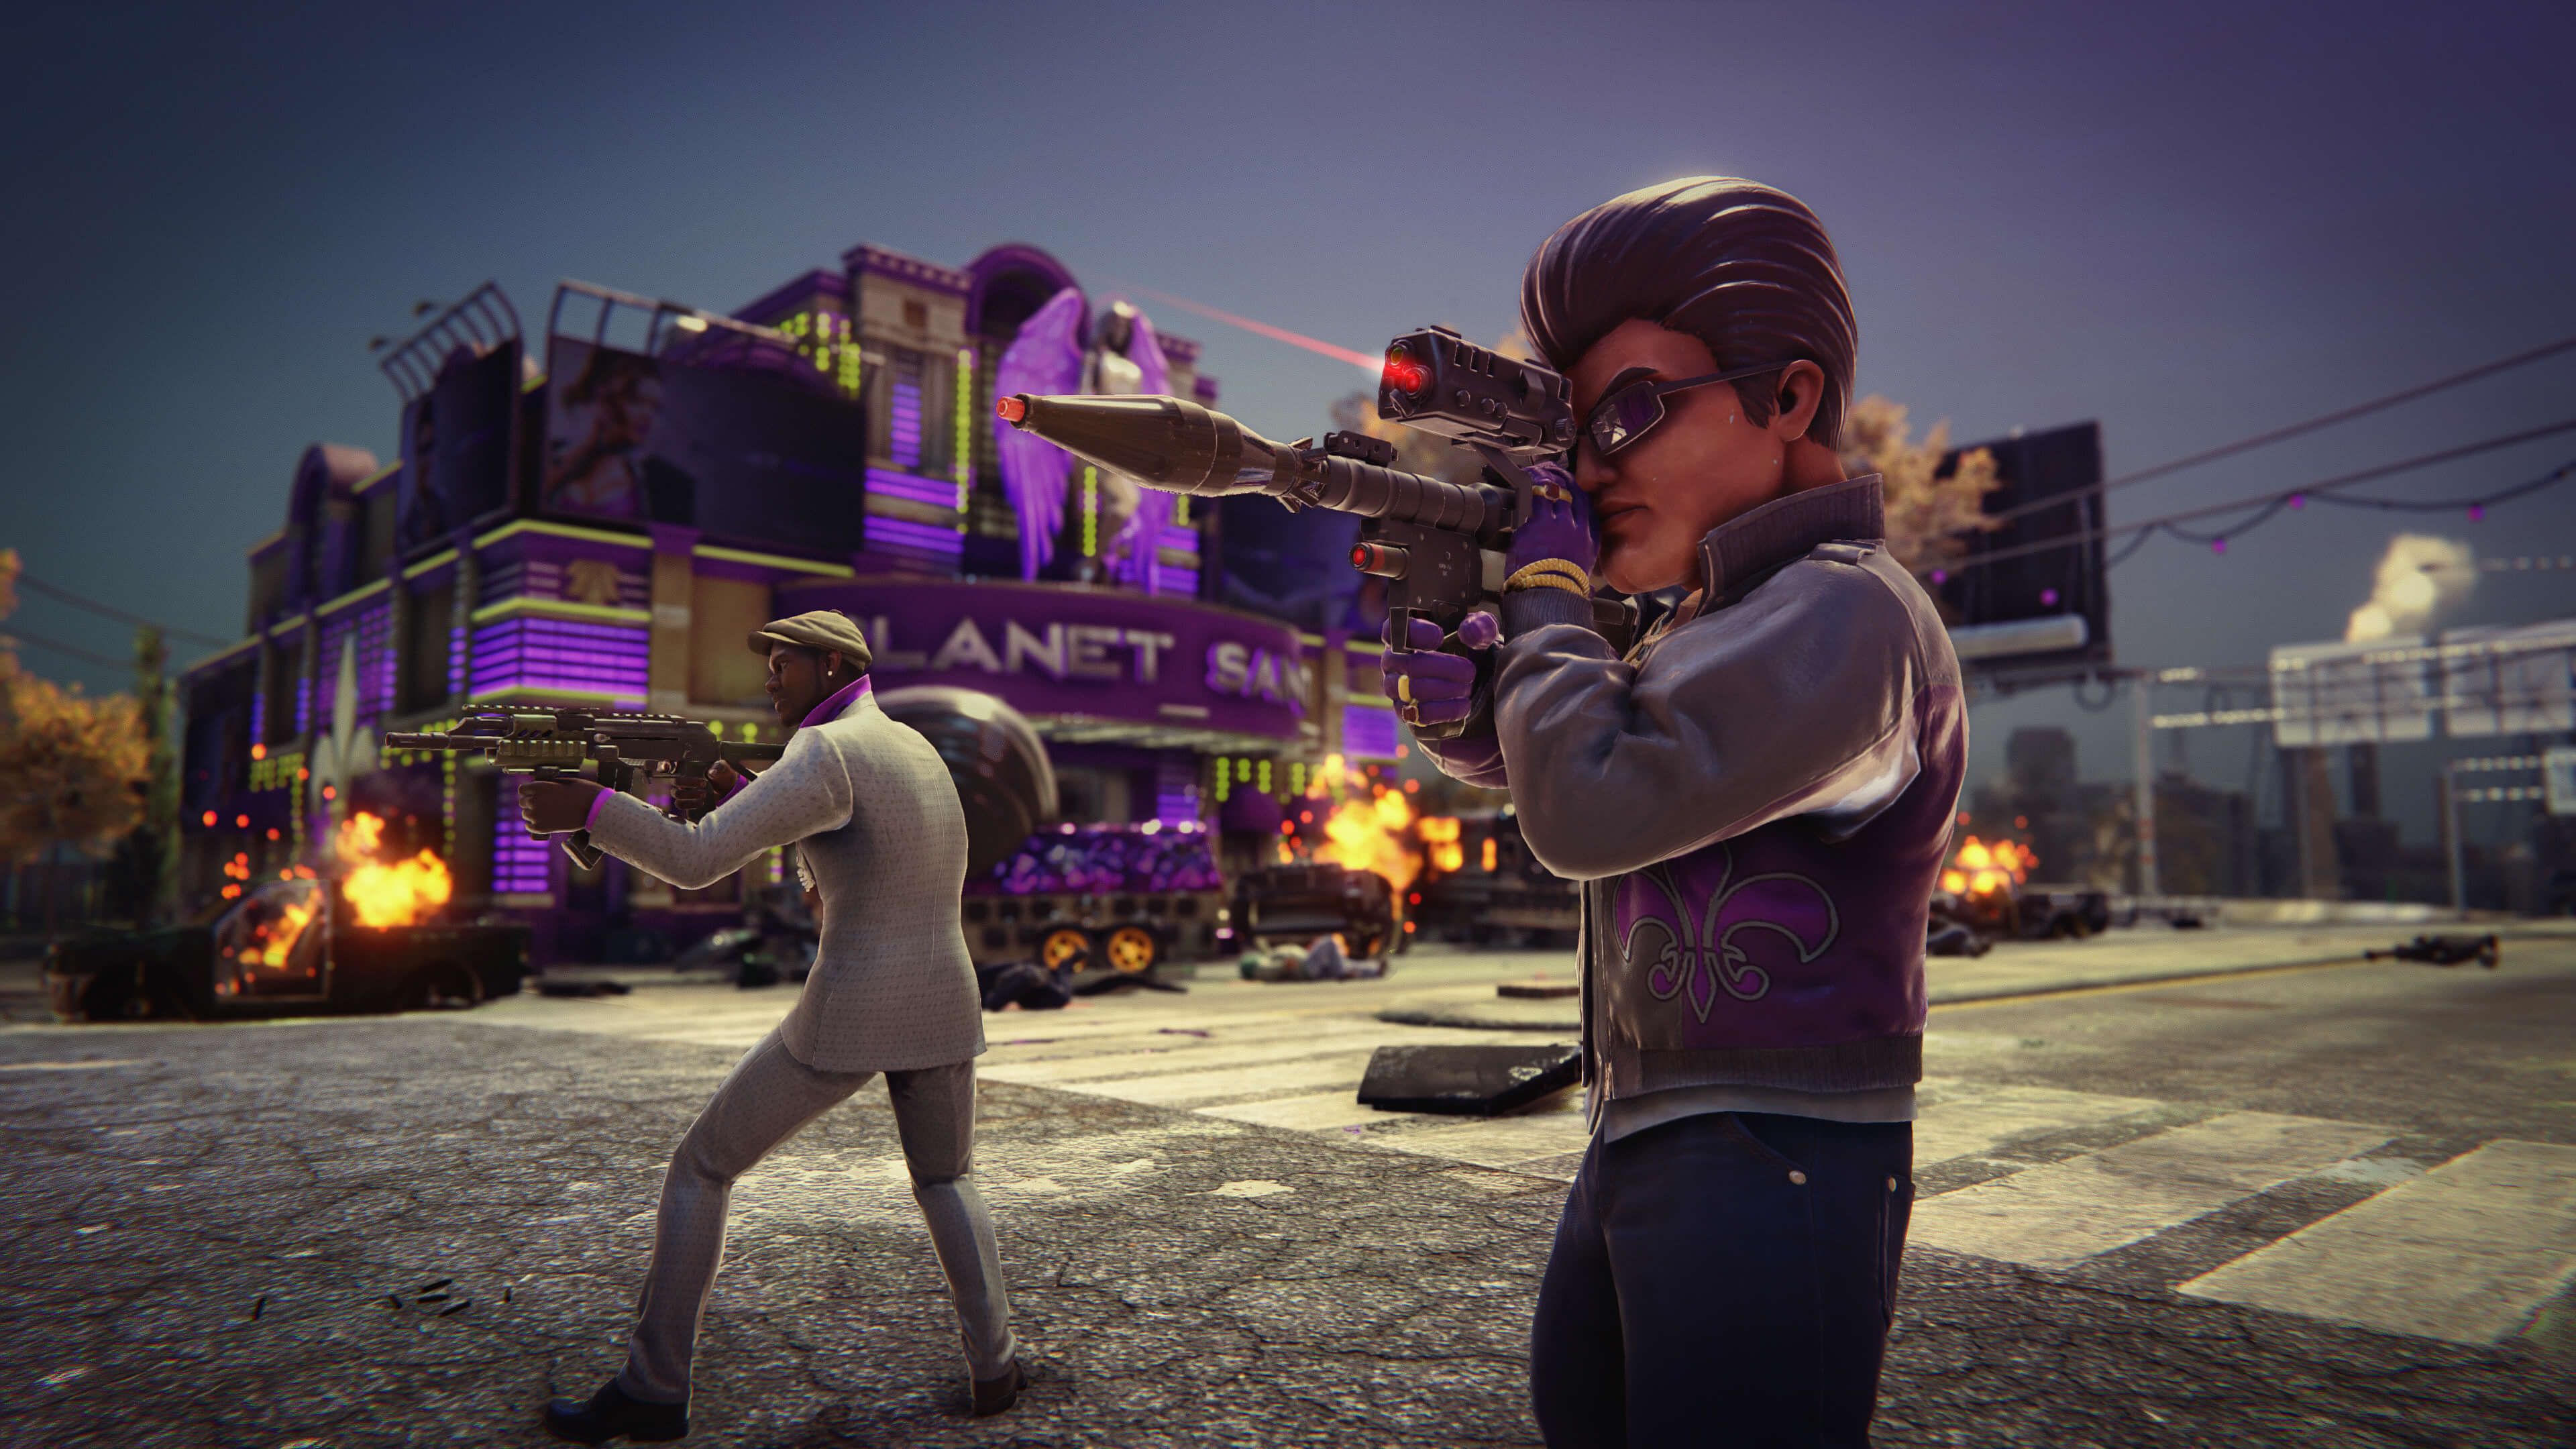 Saints Row The Third The Boss shooting in an Open World